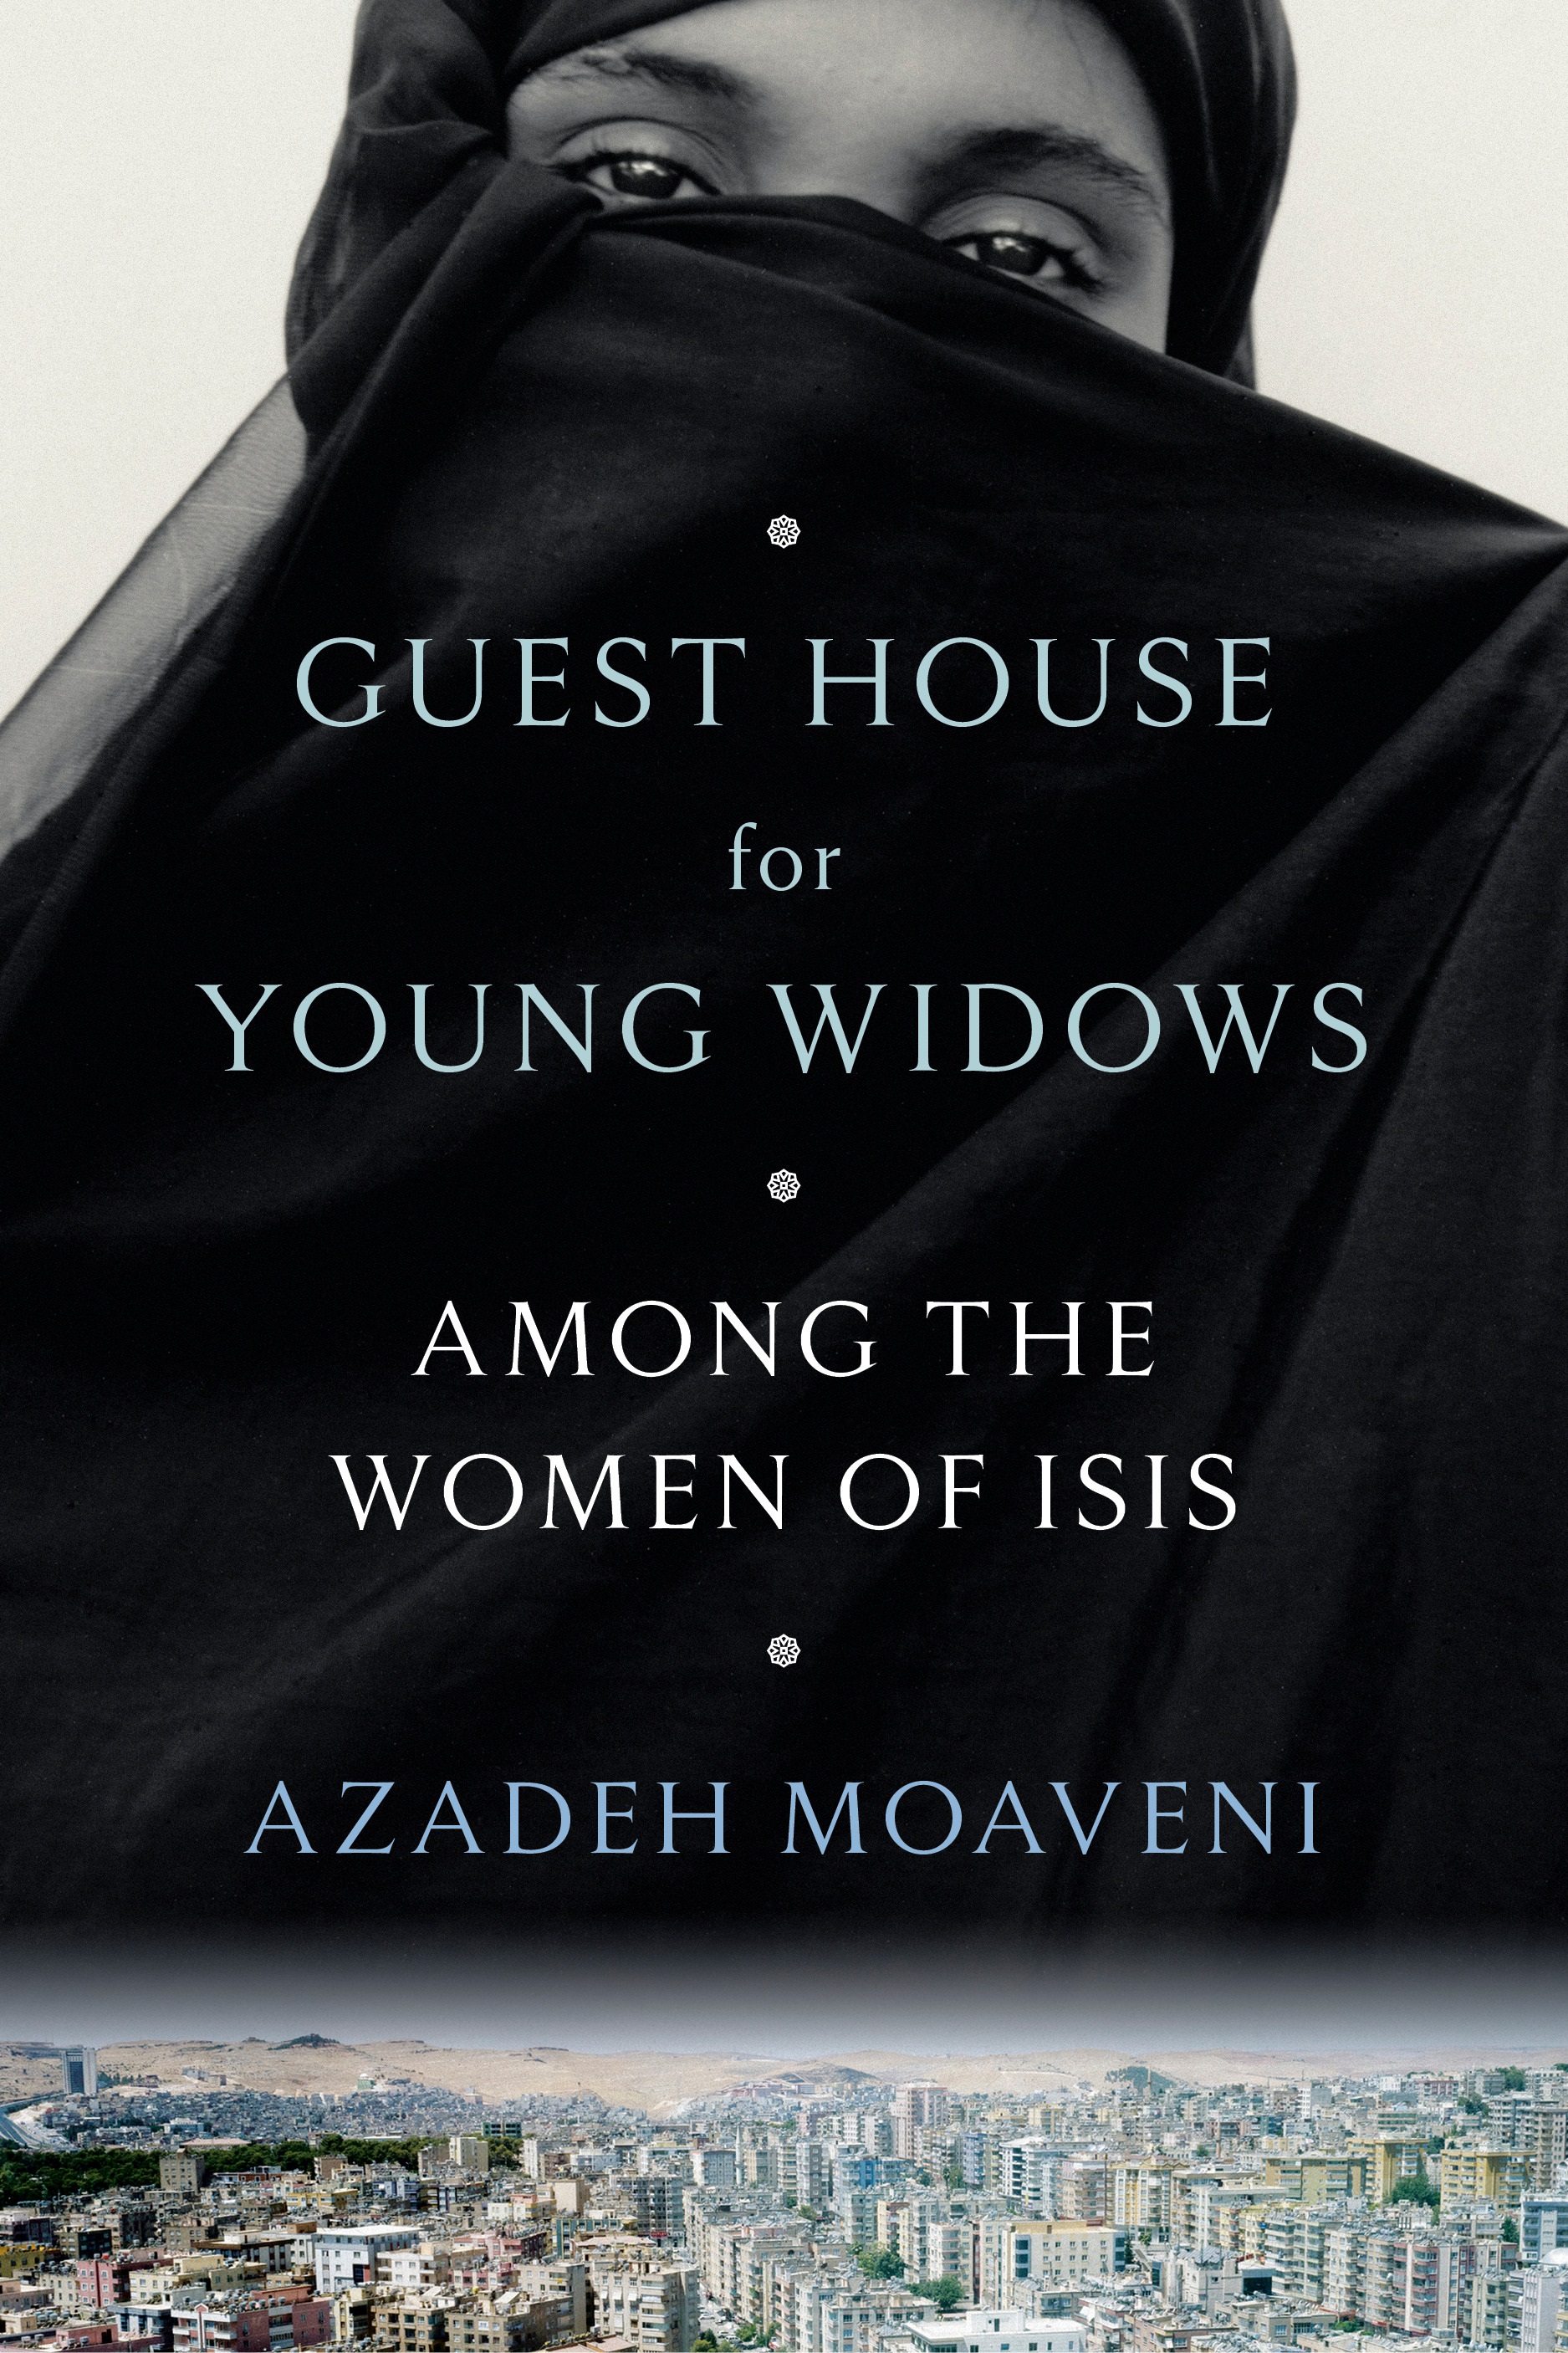 the face of a young woman wearing a veil with a city in a valley along the bottom of the page, book cover of "Guest House for Young Widows: Among the Women of Isis" by Azadeh Moaveni